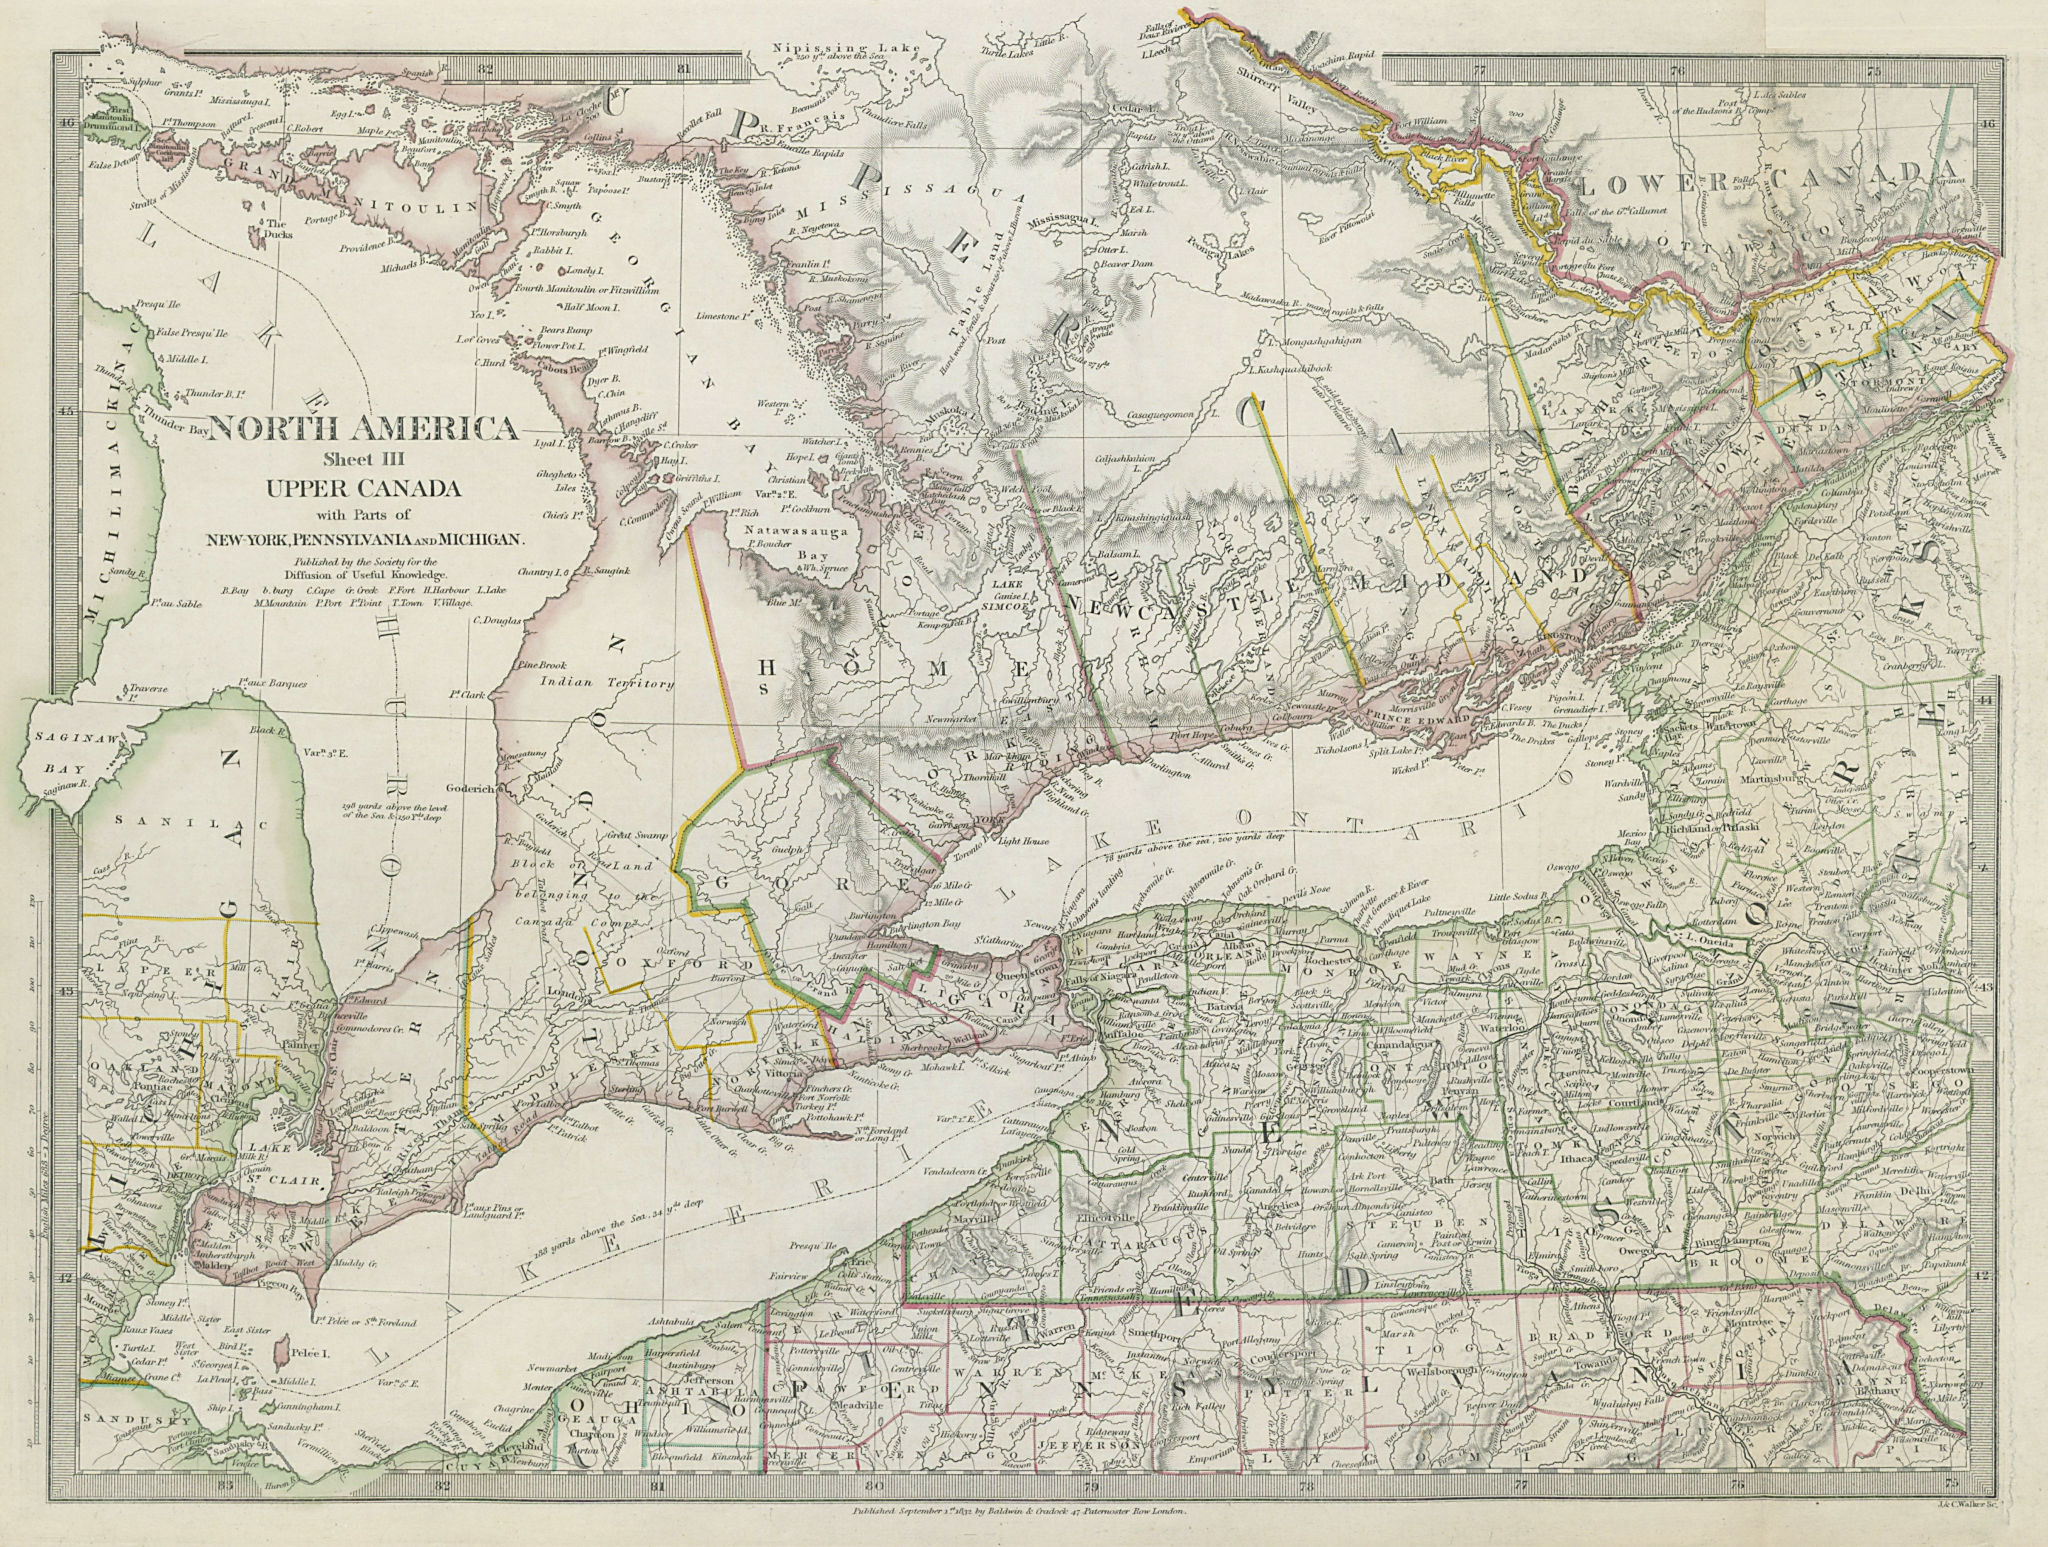 GREAT LAKES Upper Canada <1849 districts Lake Ontario Huron Erie SDUK 1844 map